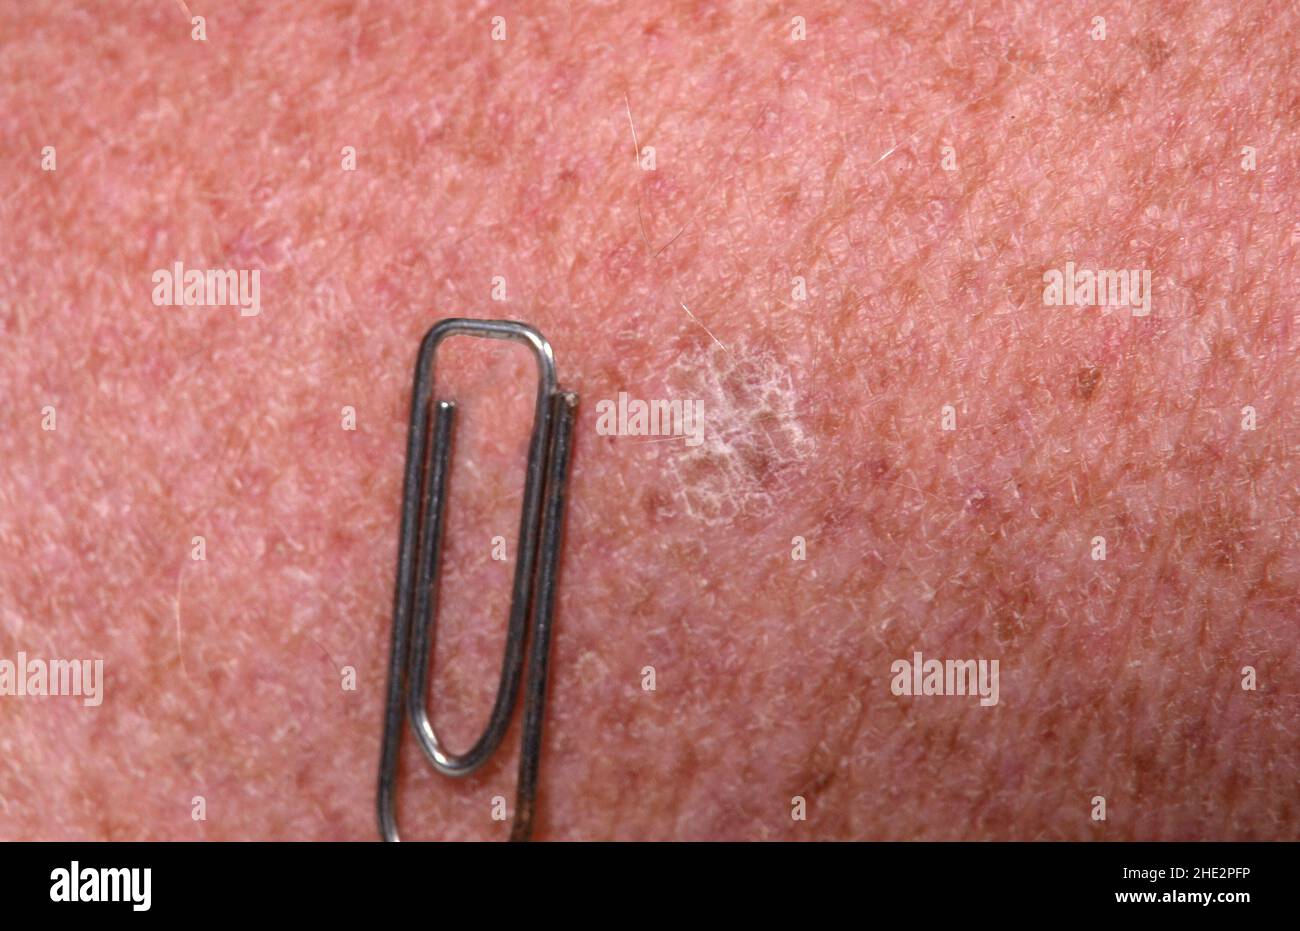 Solar keratosis on human skin, the paper clip serves as size reference. Stock Photo